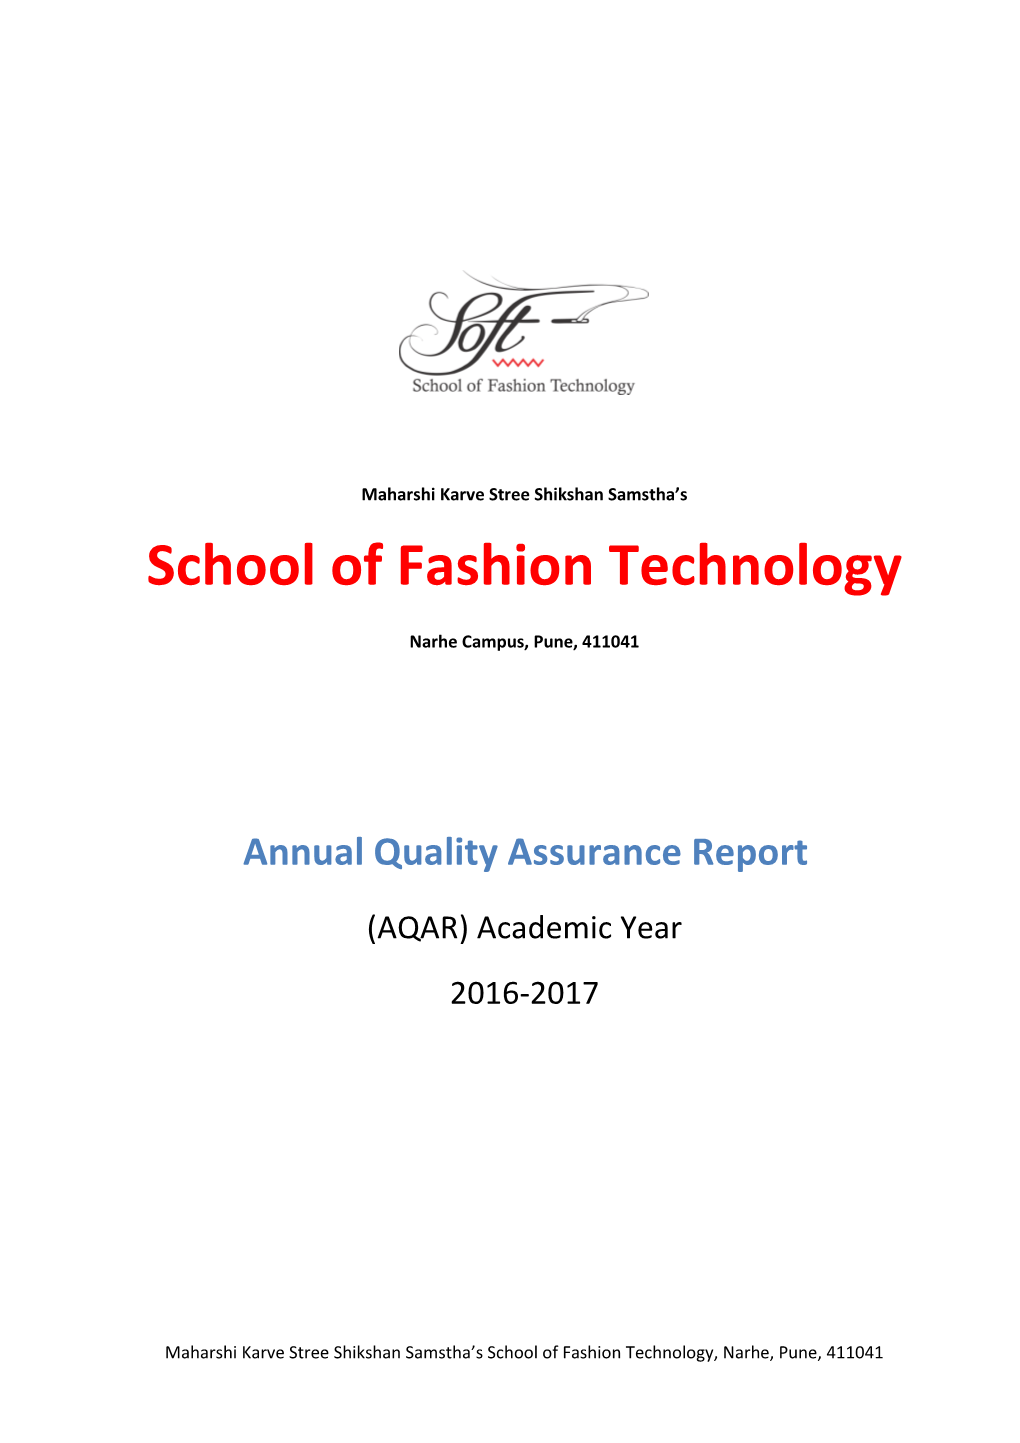 Annual Quality Assurance Report